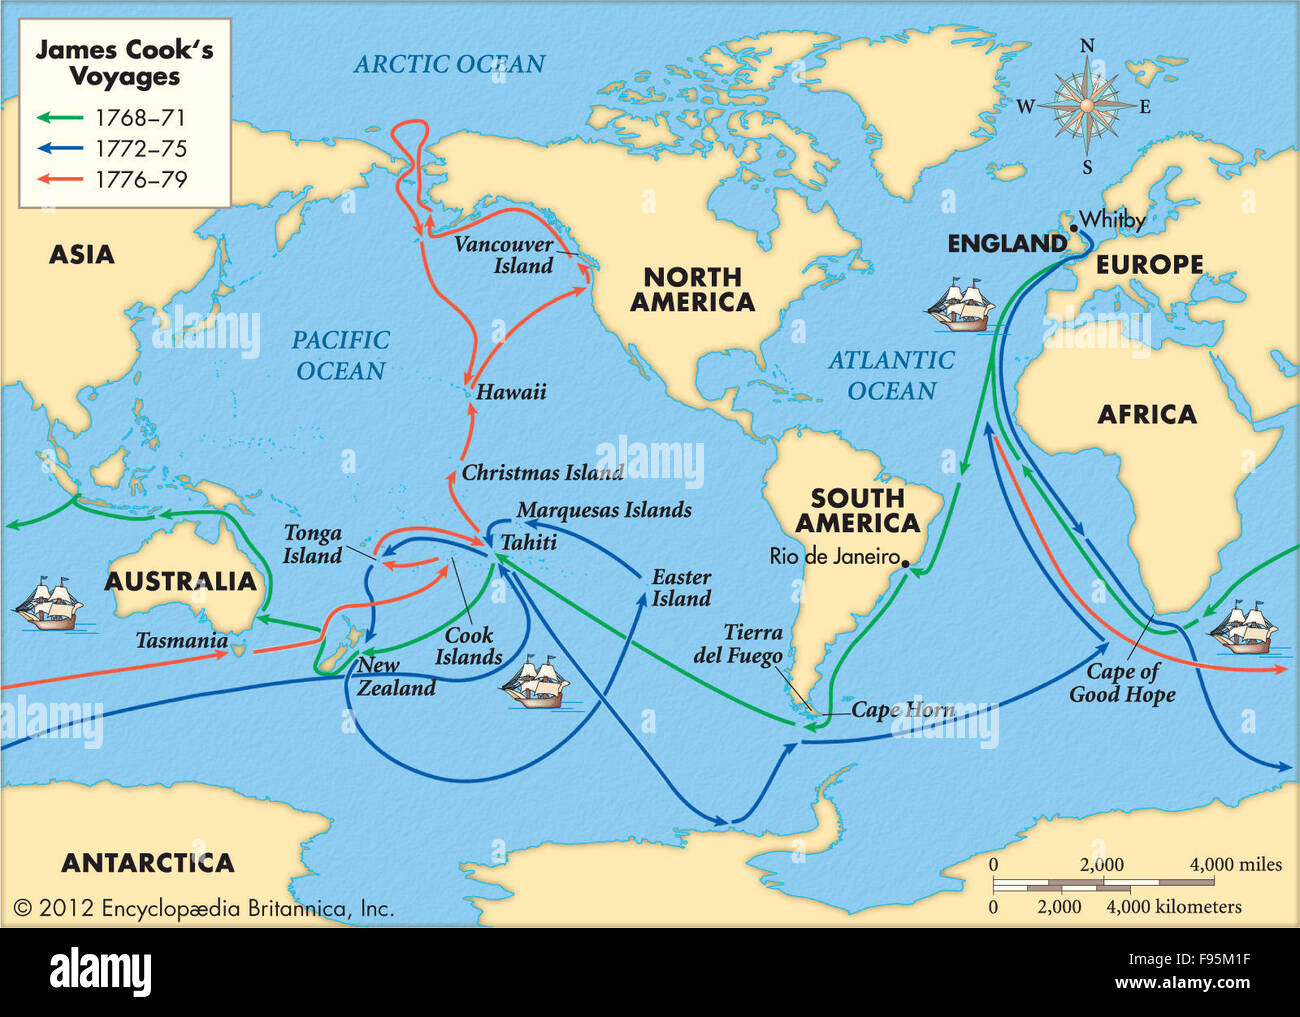 captain james cook's three voyages